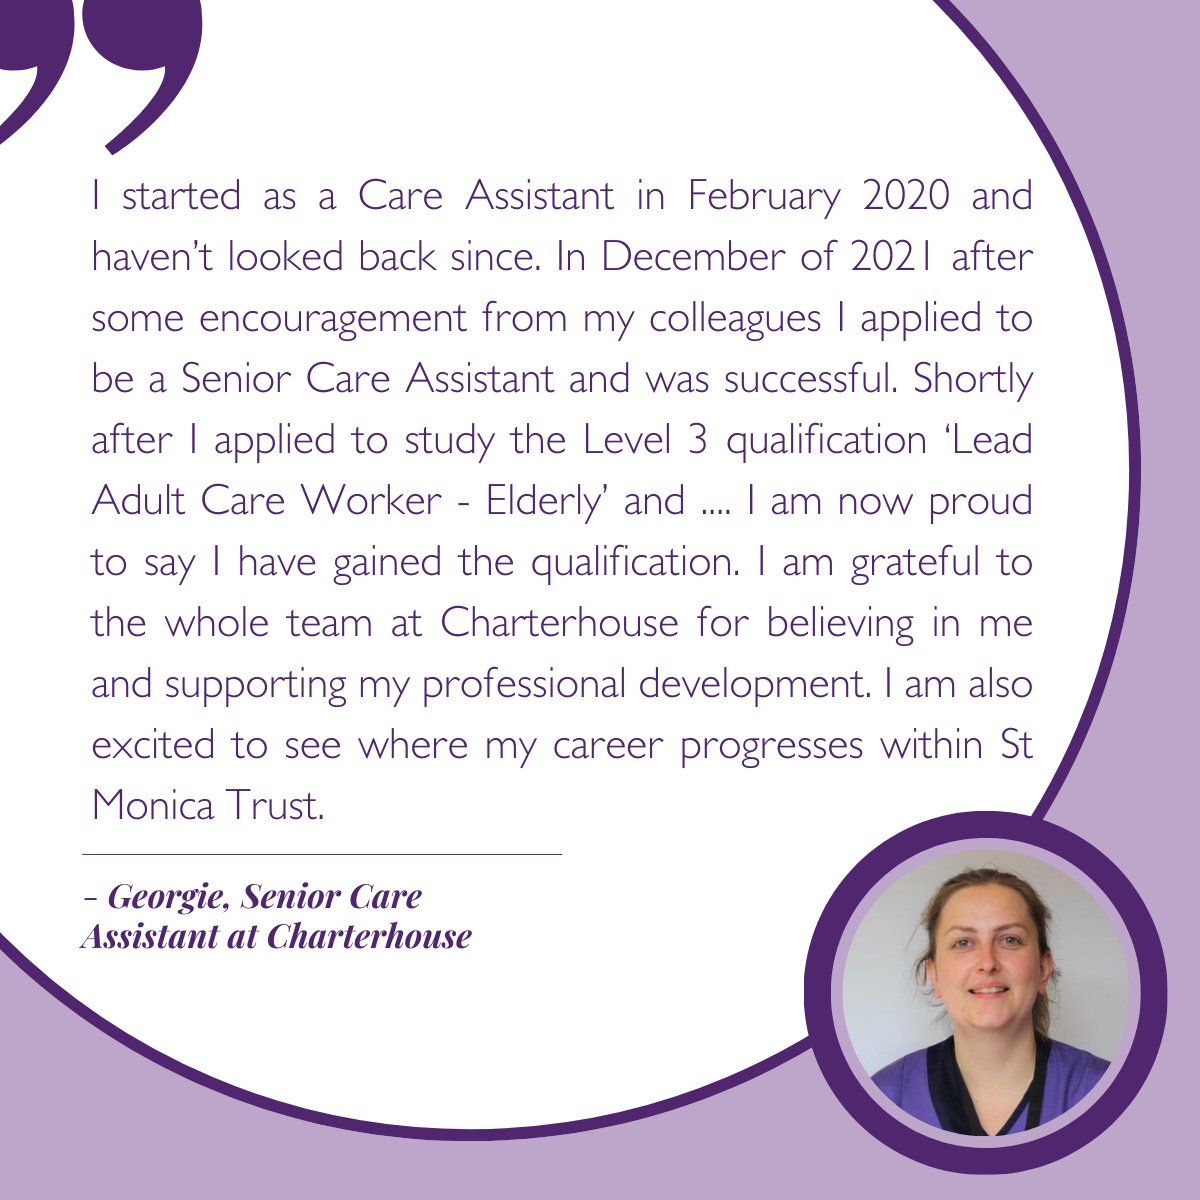 As part of #CelebratingSocialCare this month, Georgie, a Senior Care Assistant at our Charterhouse care home shares her story.